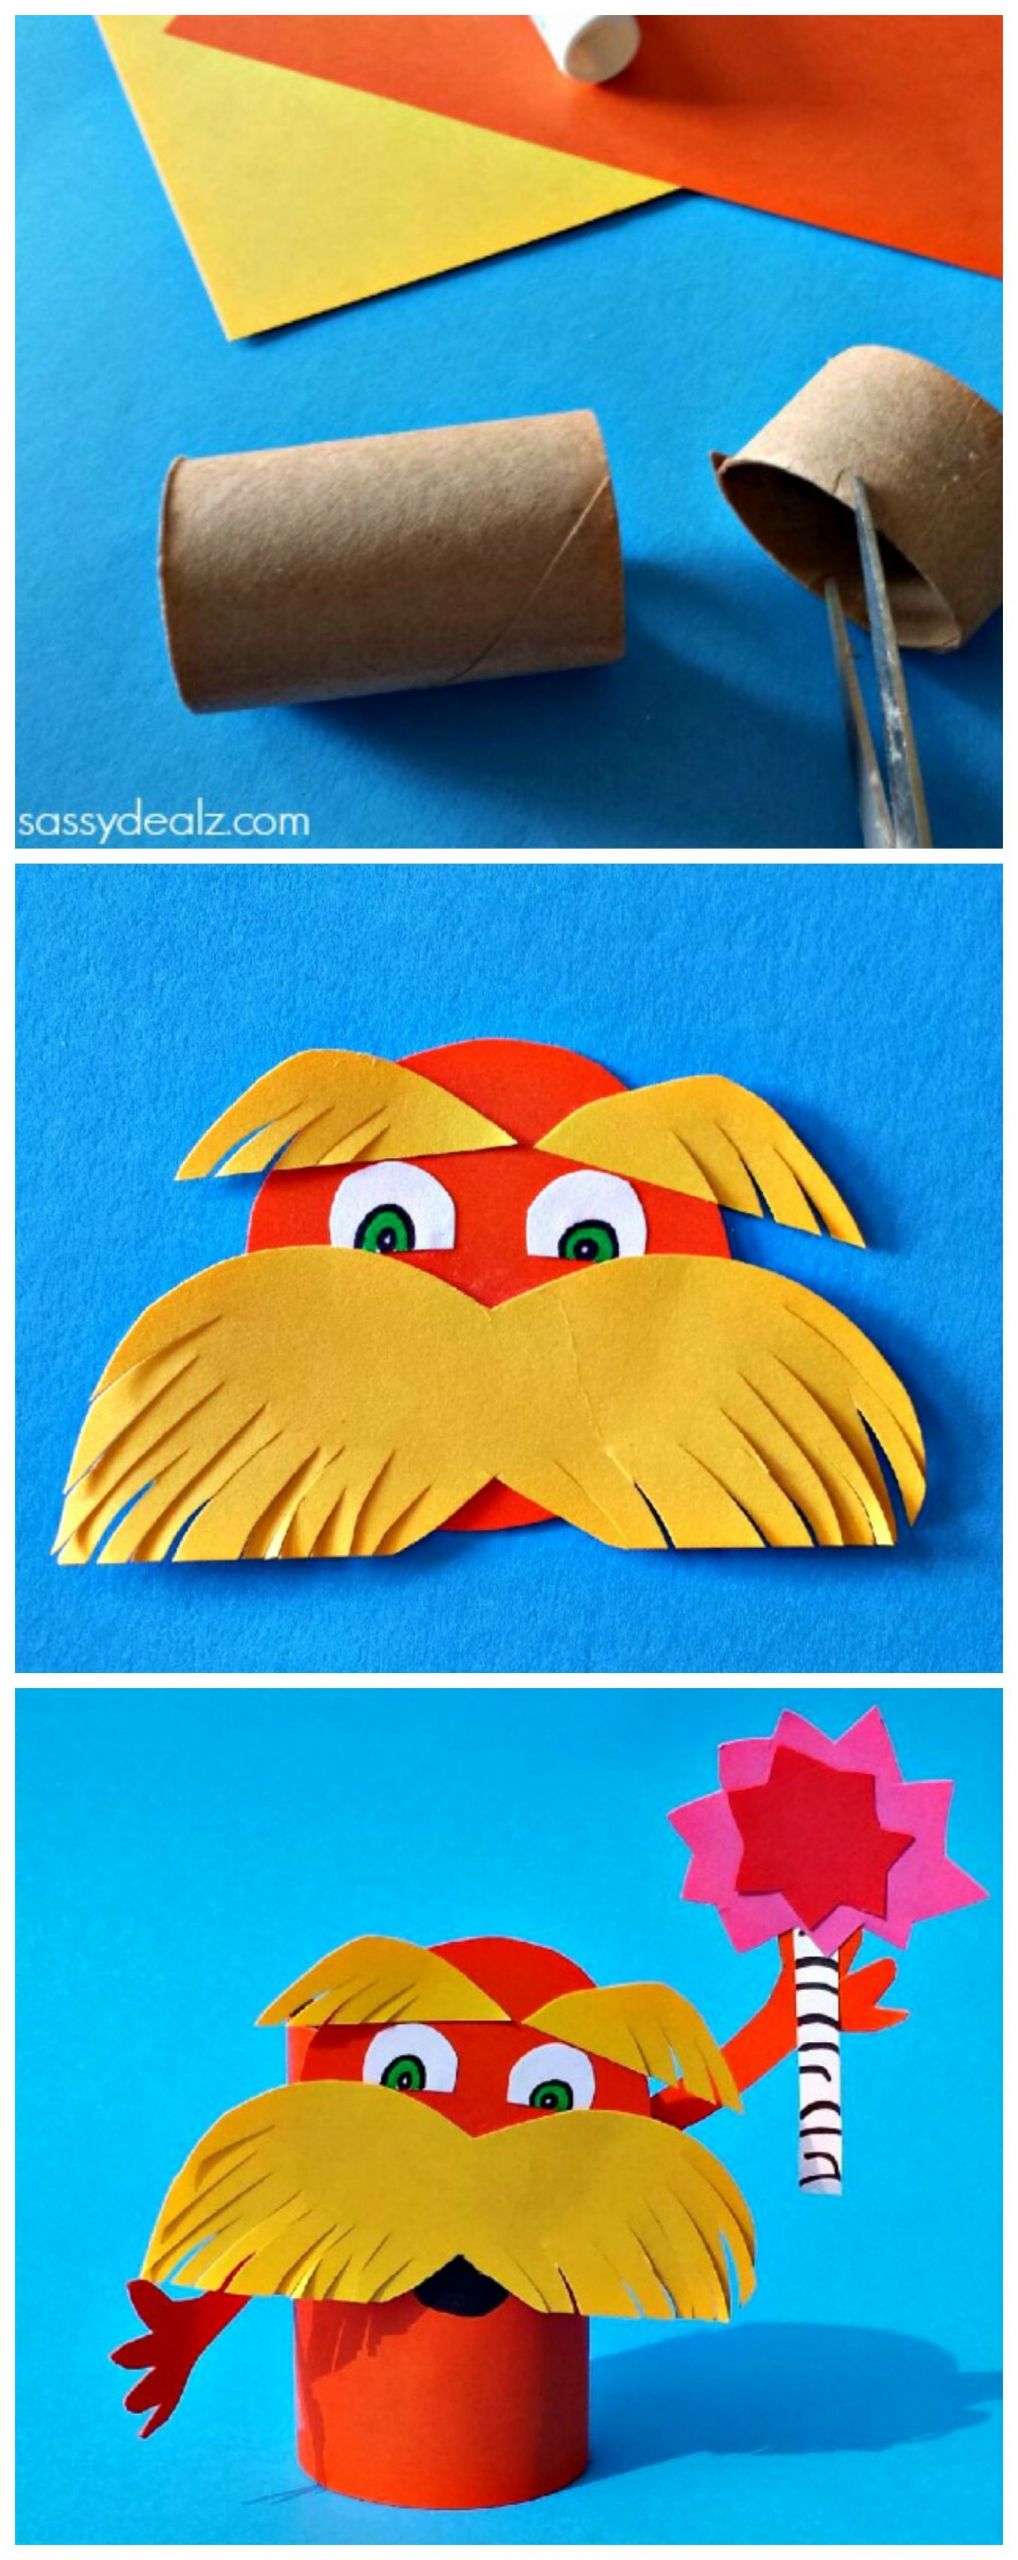 Dr Seuss Craft Ideas For Preschoolers
 Lorax Toilet Paper Roll Craft For Kids Dr Suess